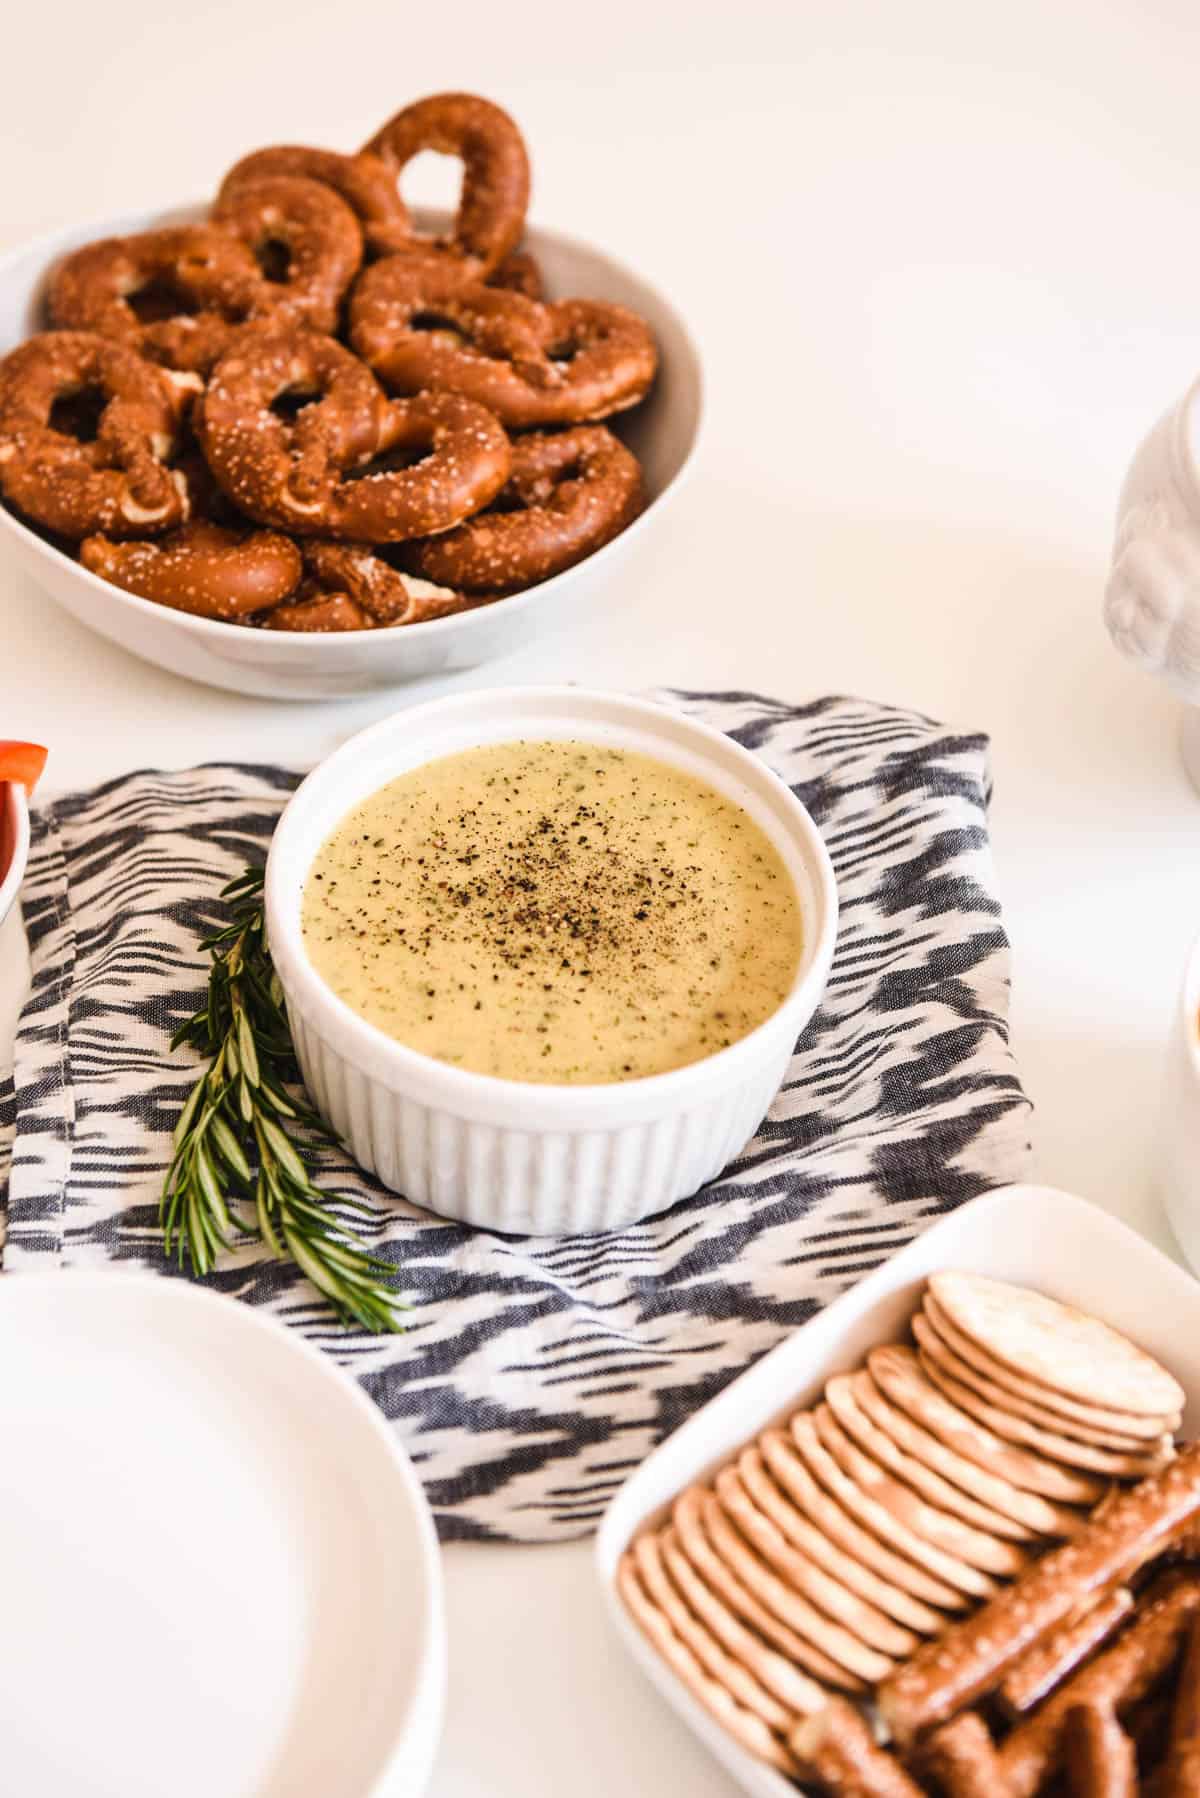 A small white bowl with hot beer cheese dip next to bowls of crackers and pretzels.